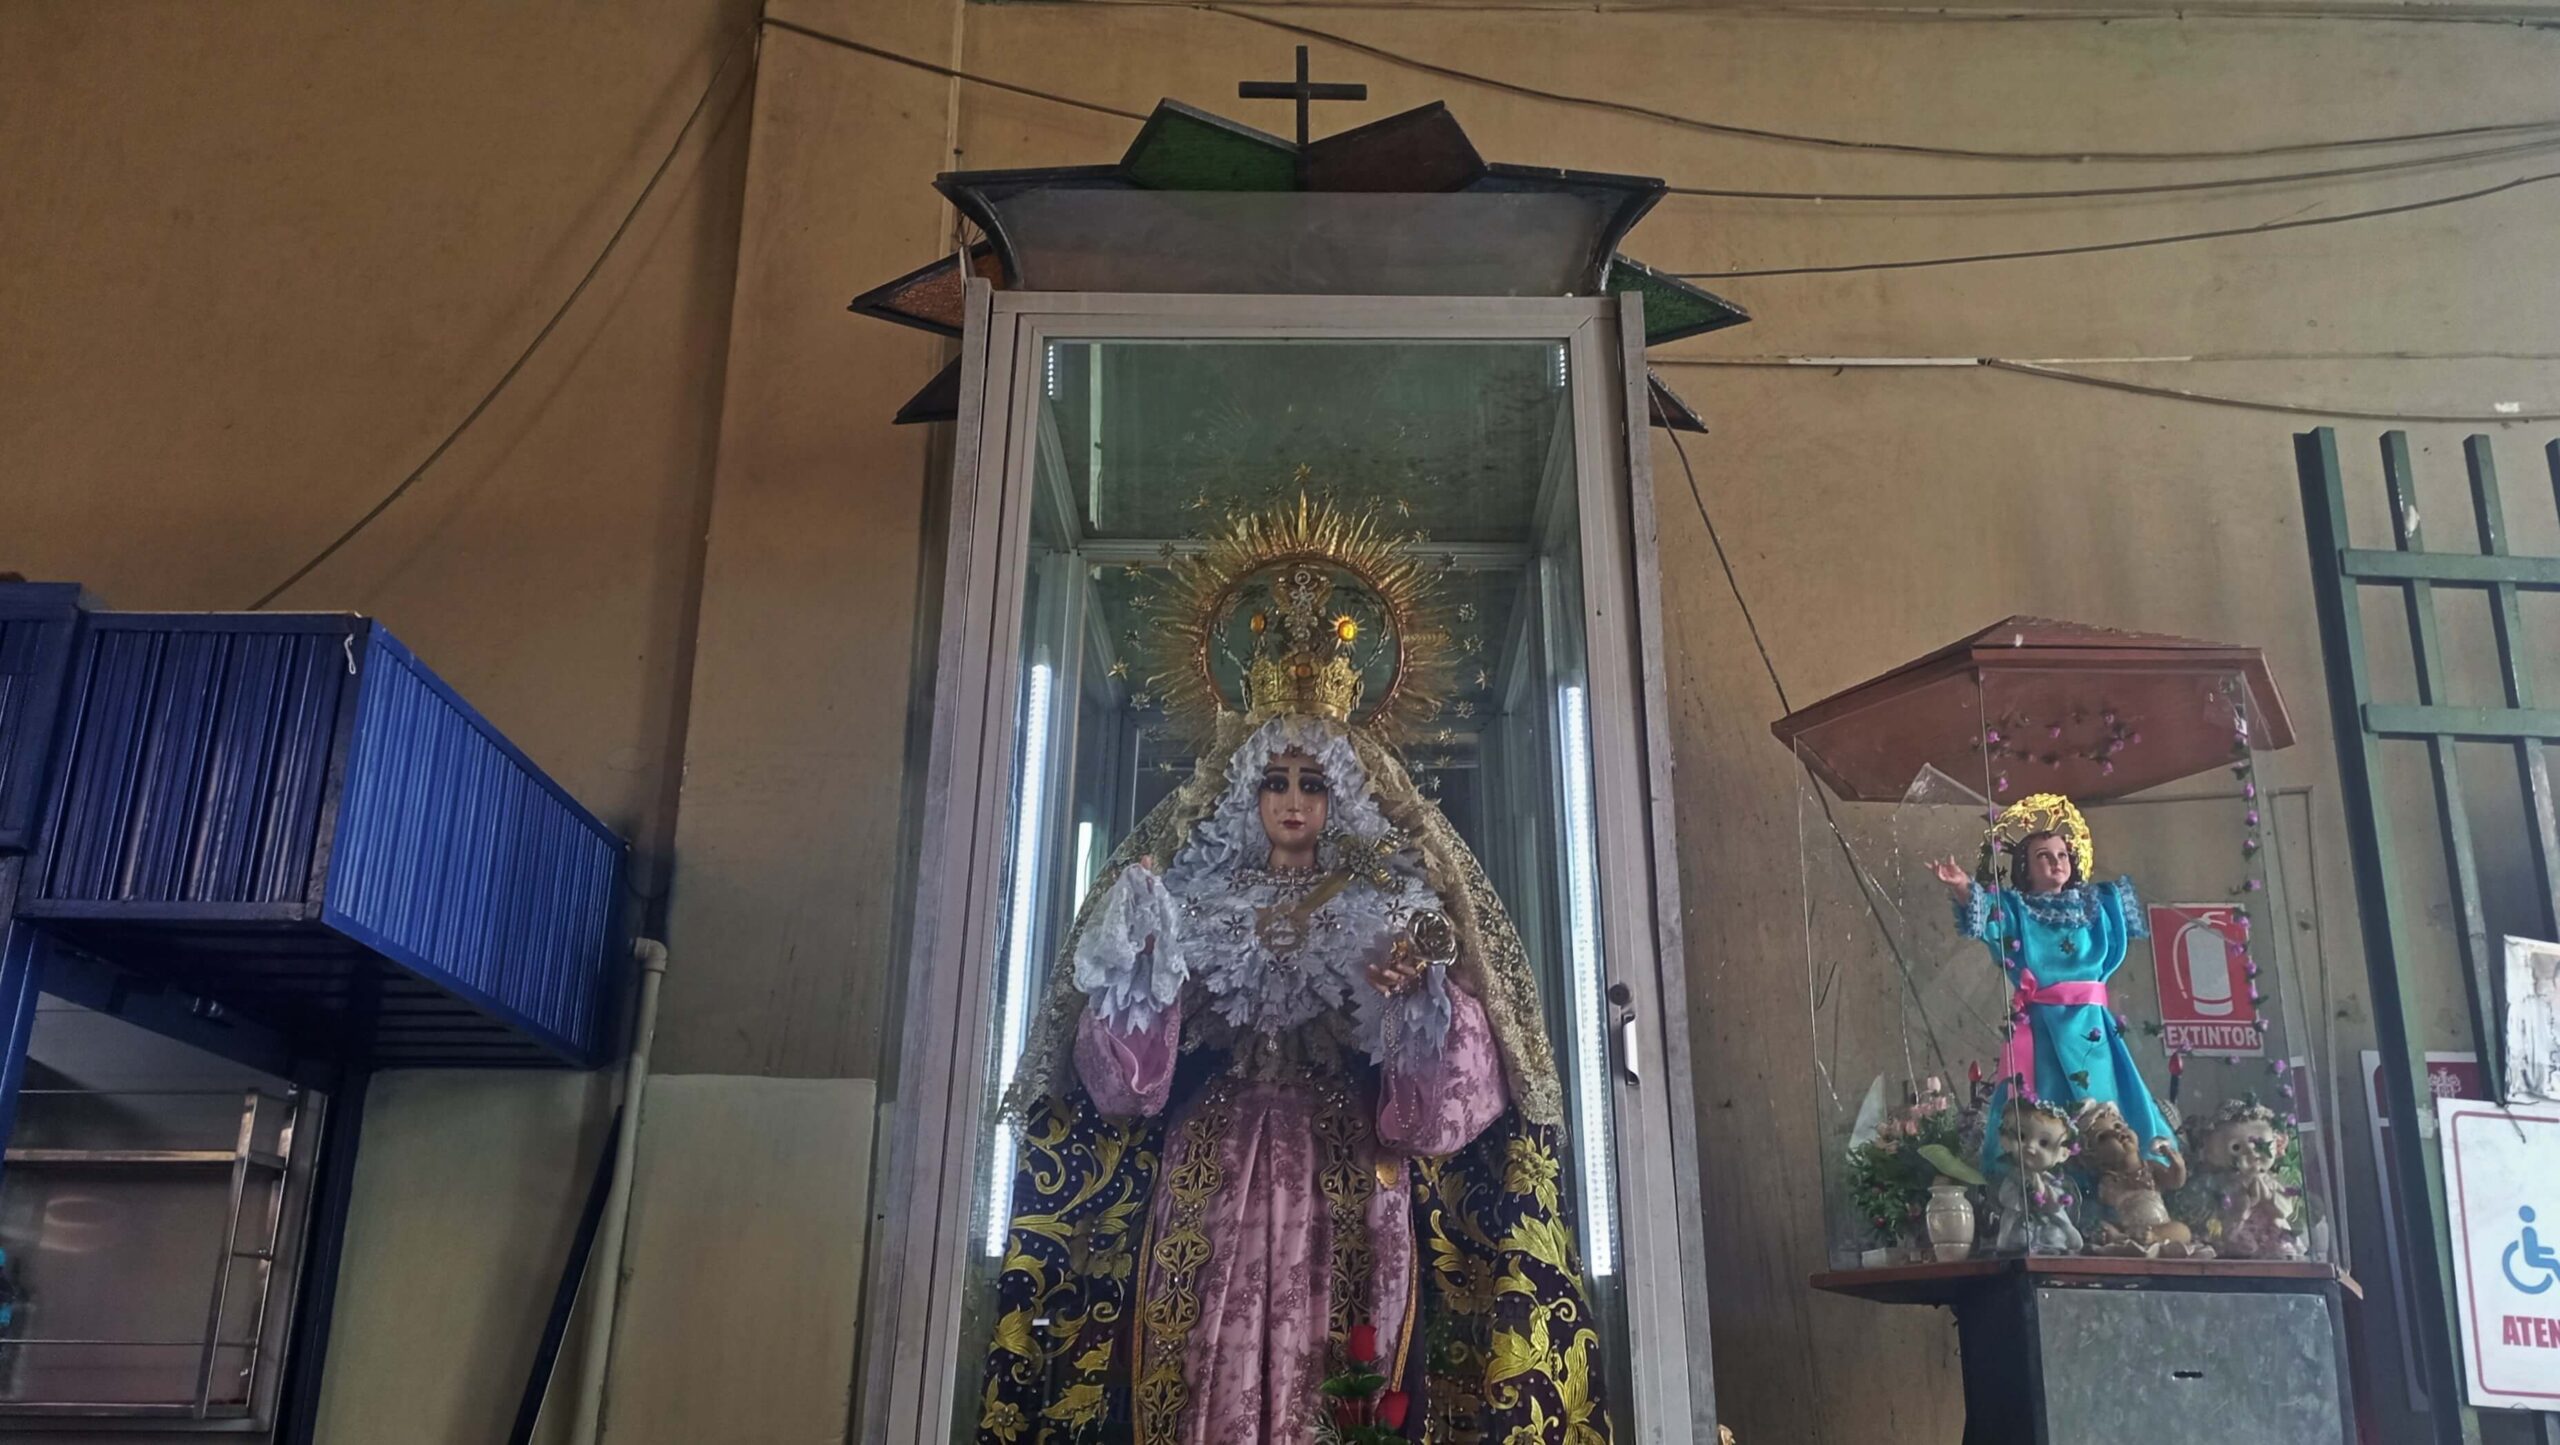 Altar of the Virgin Mary at the entrance to the market